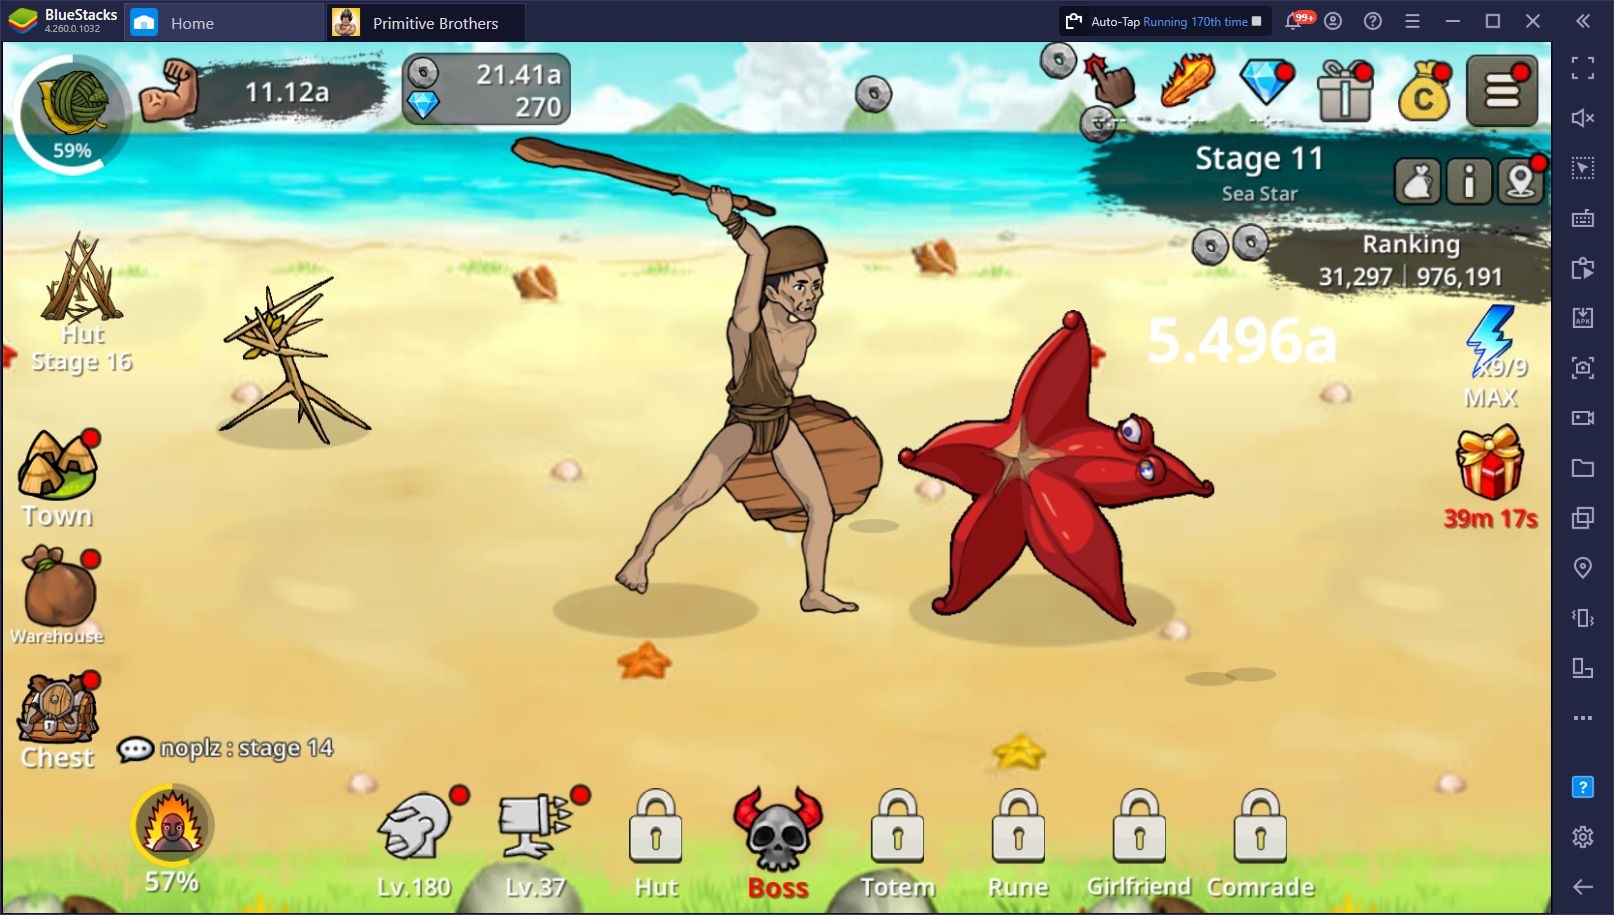 Primitive Brothers: Endless Evolution - How to Play This Mobile Clicker Game on Your PC